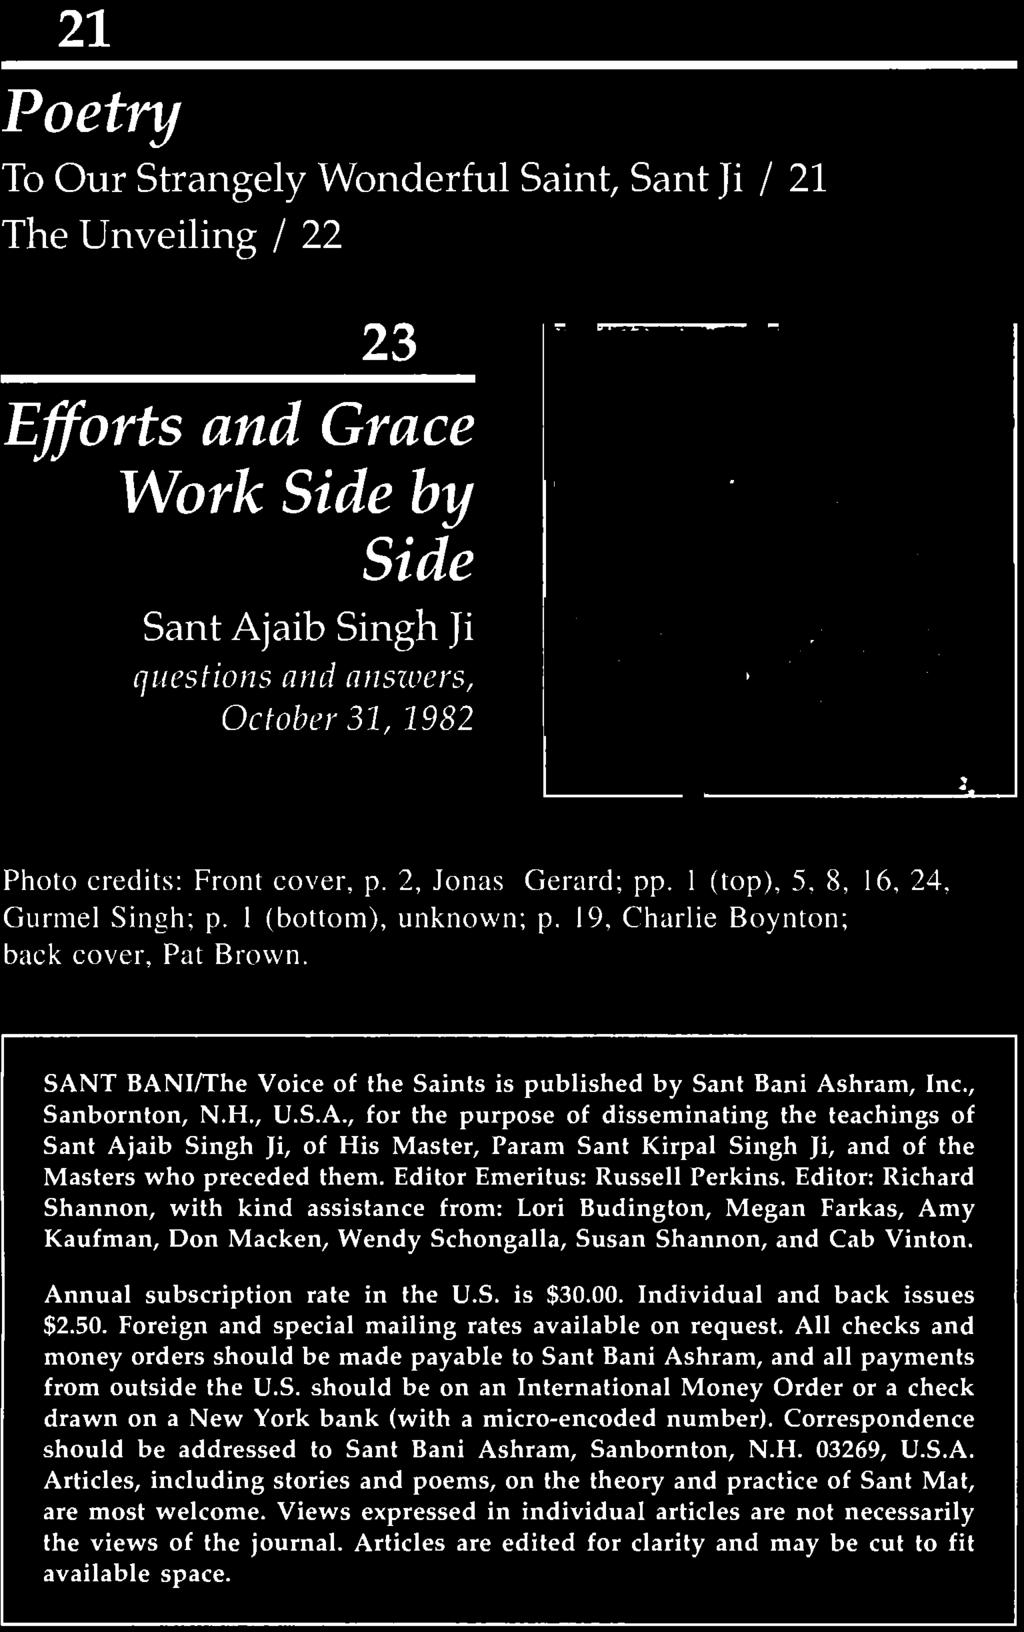 SANT BANIIThe Voice of the Saints is published by Sant Bani Ashram, Inc., Sanbornton, N.H., U.S.A., for the purpose of disseminating the teachings of Sant Ajaib Singh Ji, of His Master, Param Sant Kirpal Singh Ji, and of the Masters who preceded them.